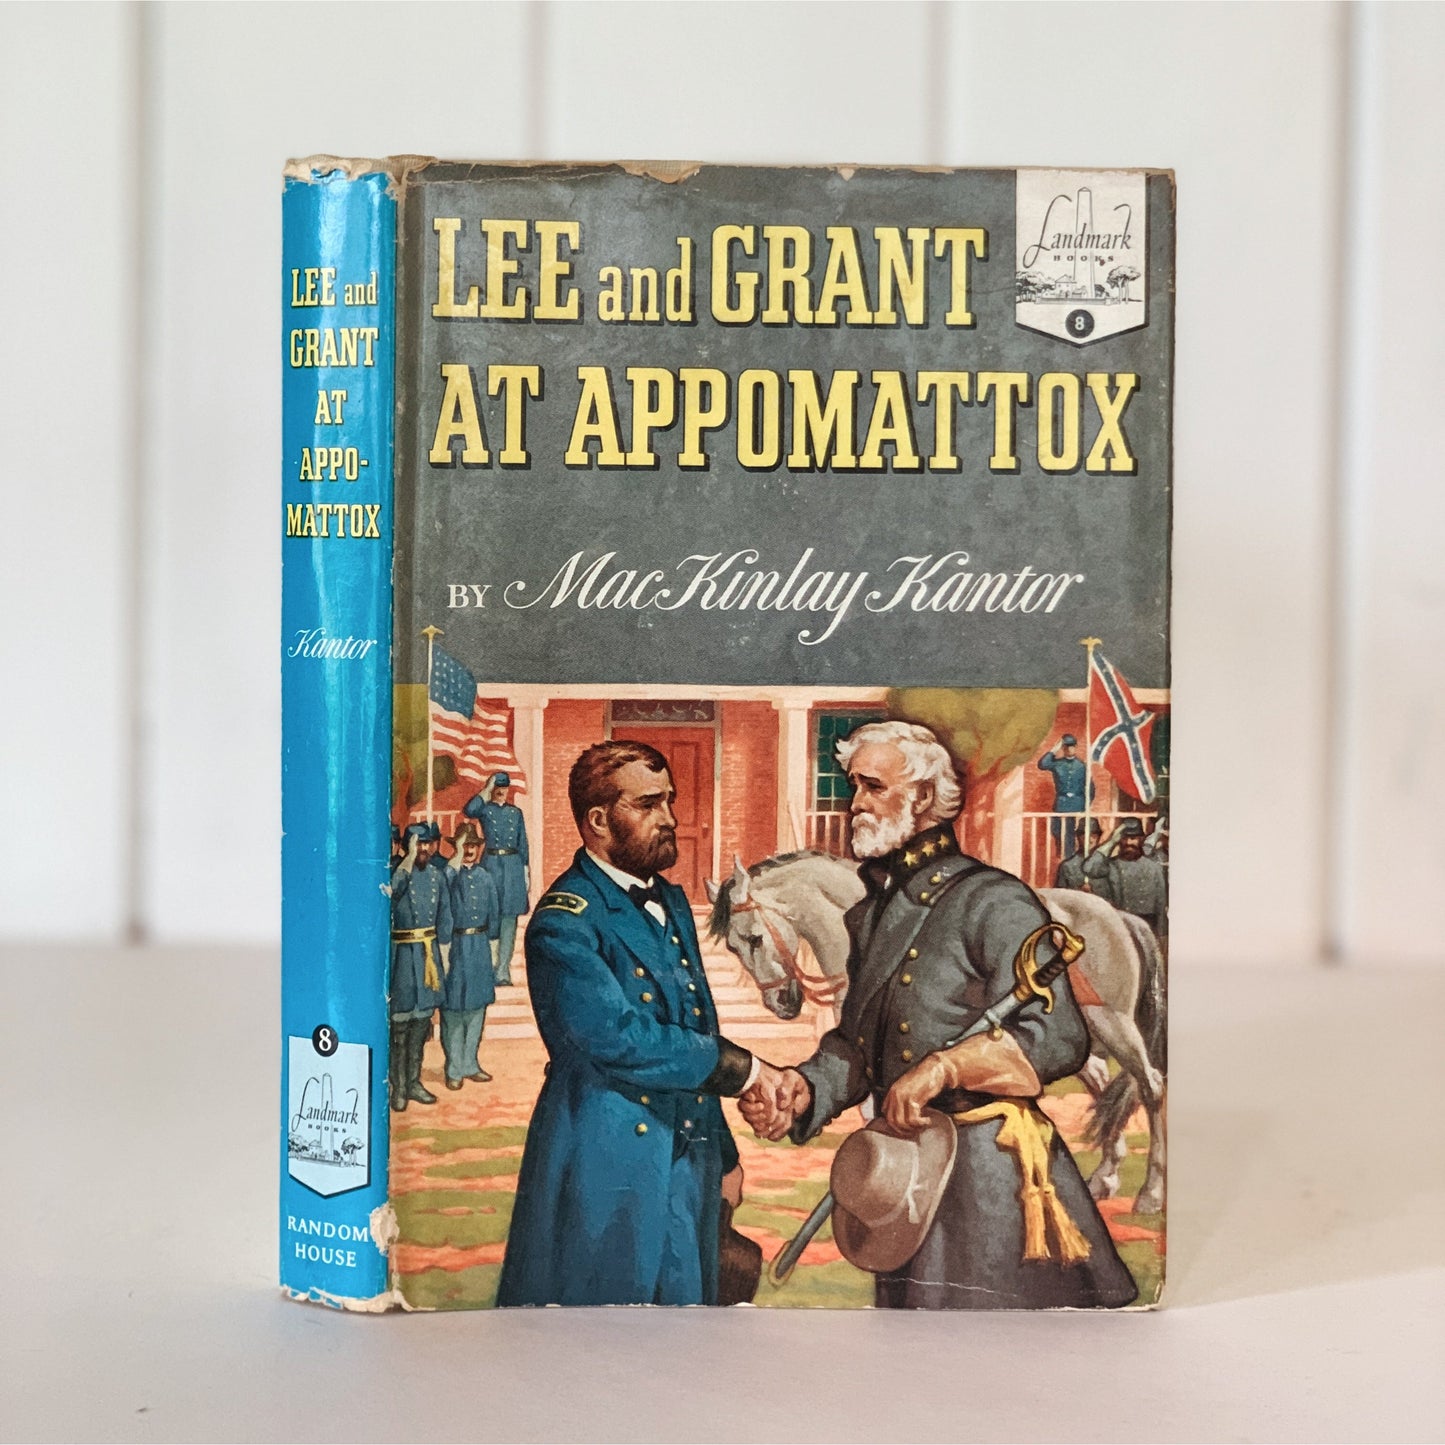 Lee and Grant at Appomattox, Landmark Book, 1950 Hardcover